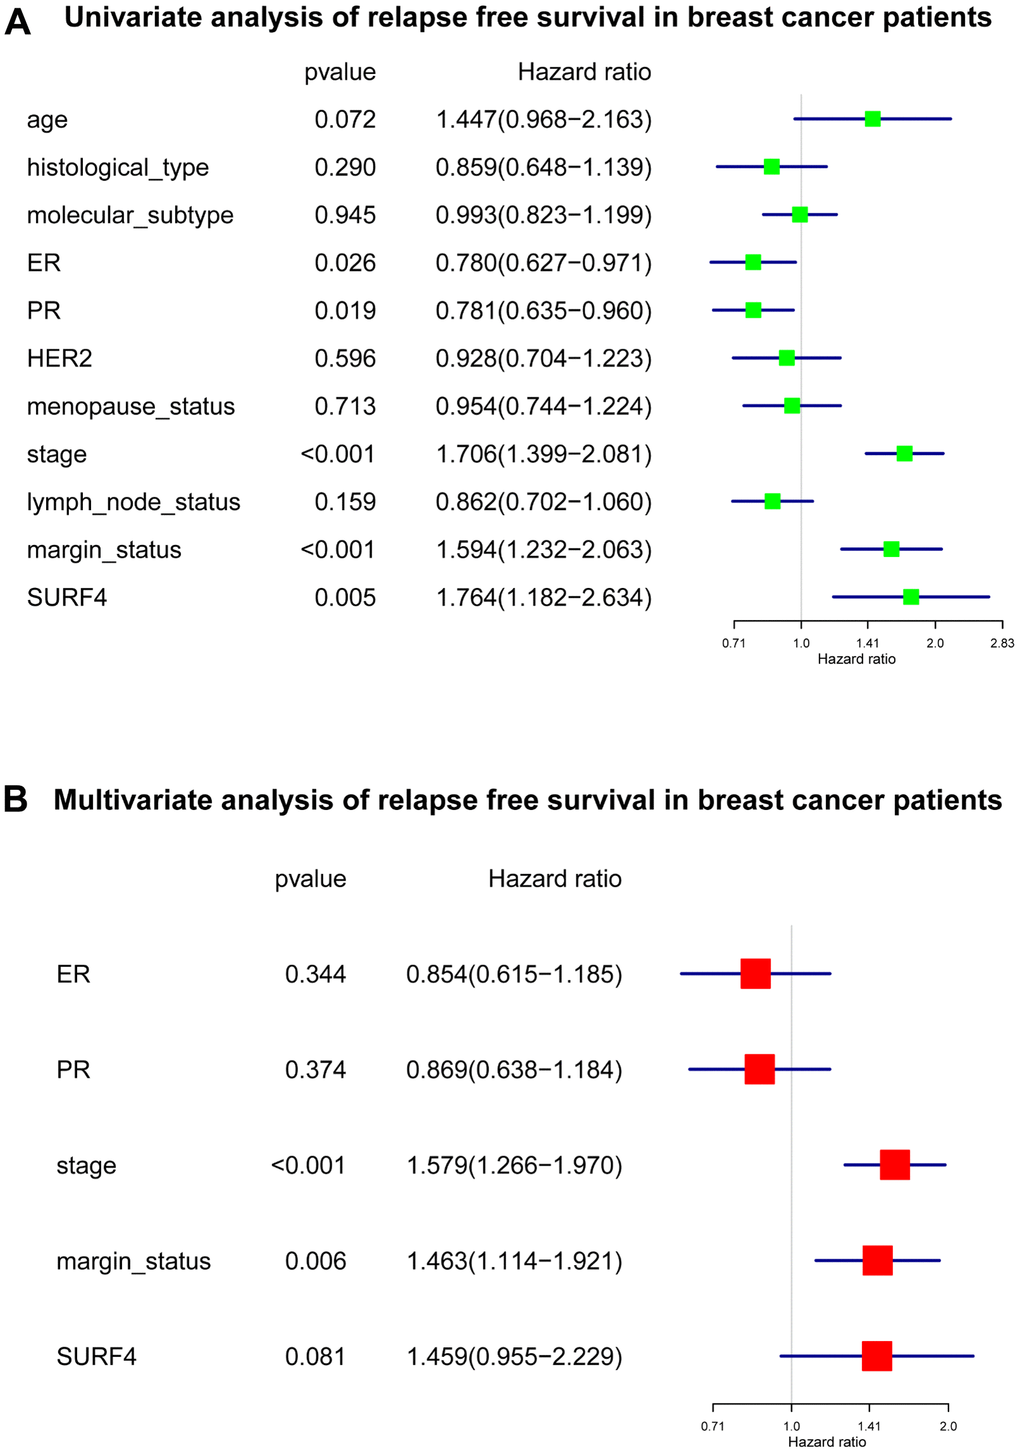 Forest plot of Cox regression analysis about SURF4 and RFS. (A) Univariate analysis of RFS in breast cancer patients. (B) Multivariate analysis of RFS in breast cancer patients.